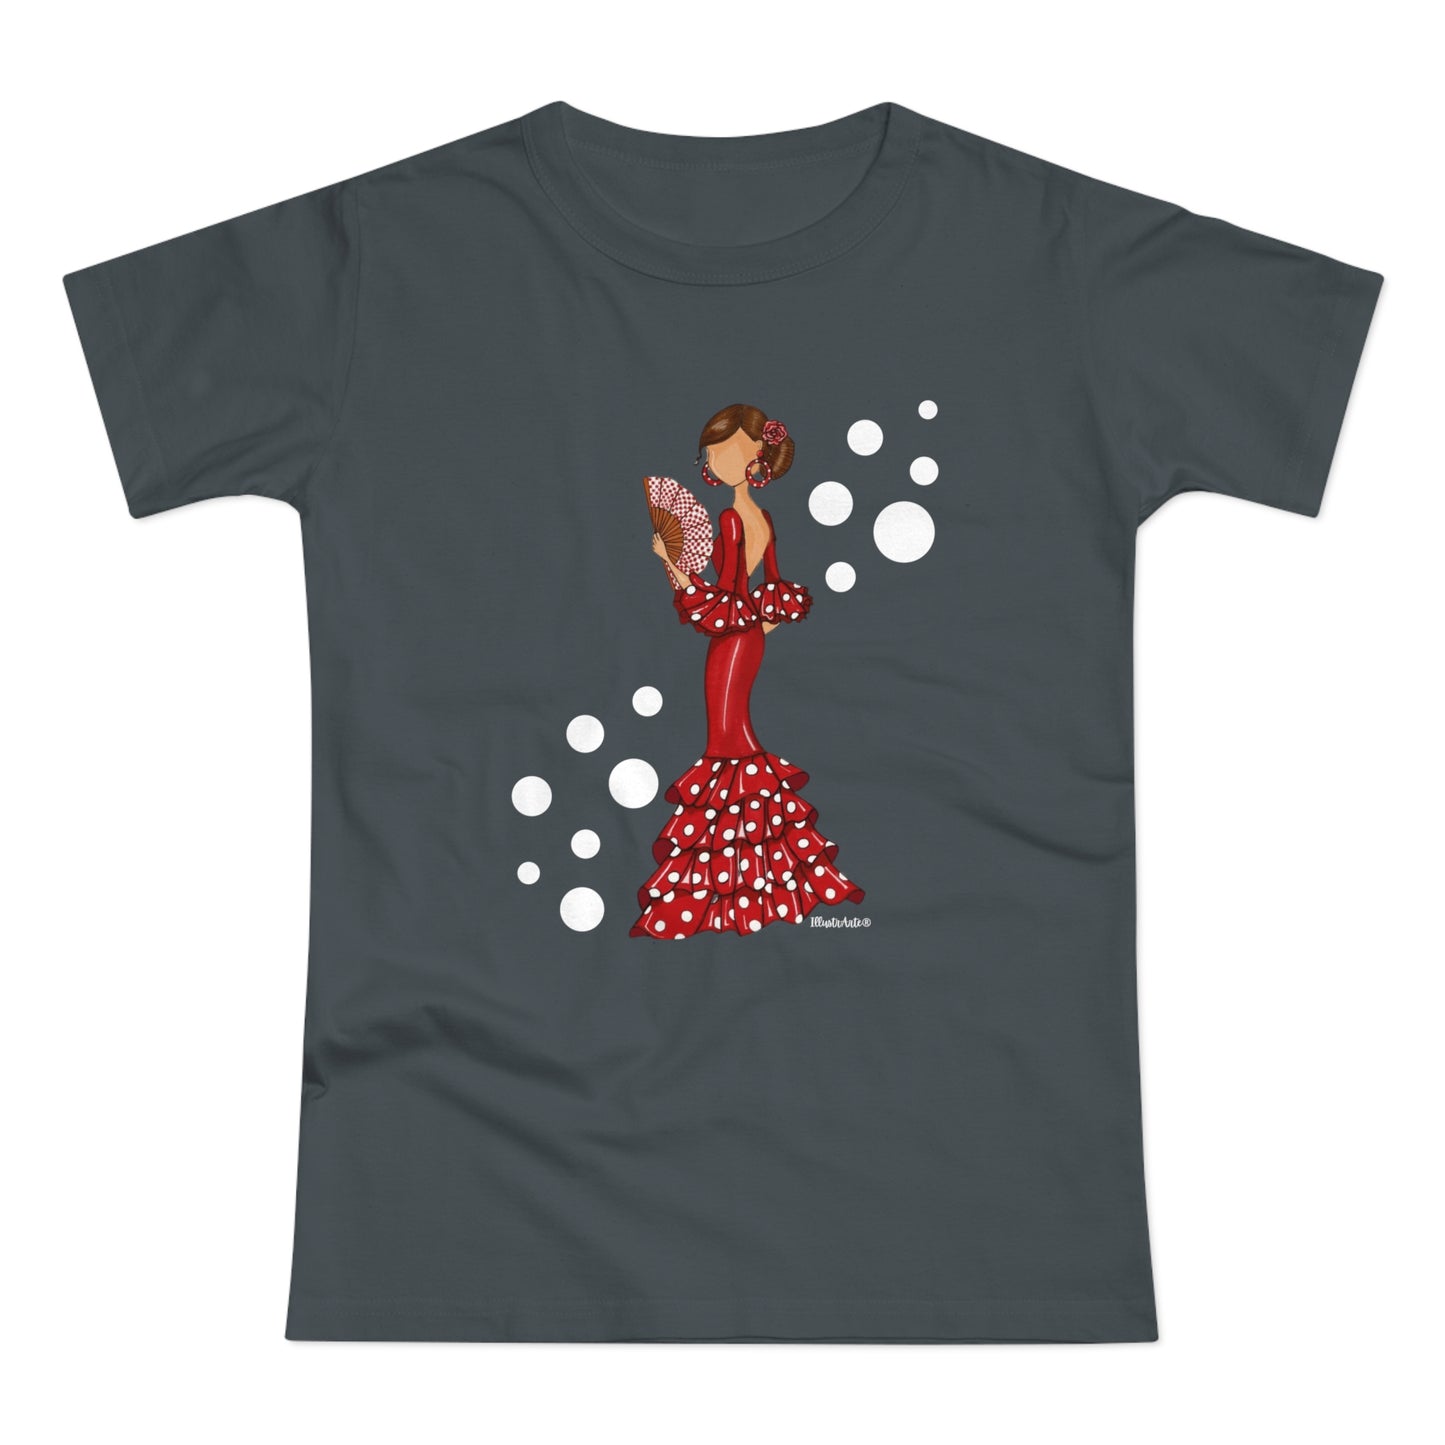 a women's t - shirt with a woman in a polka dot dress